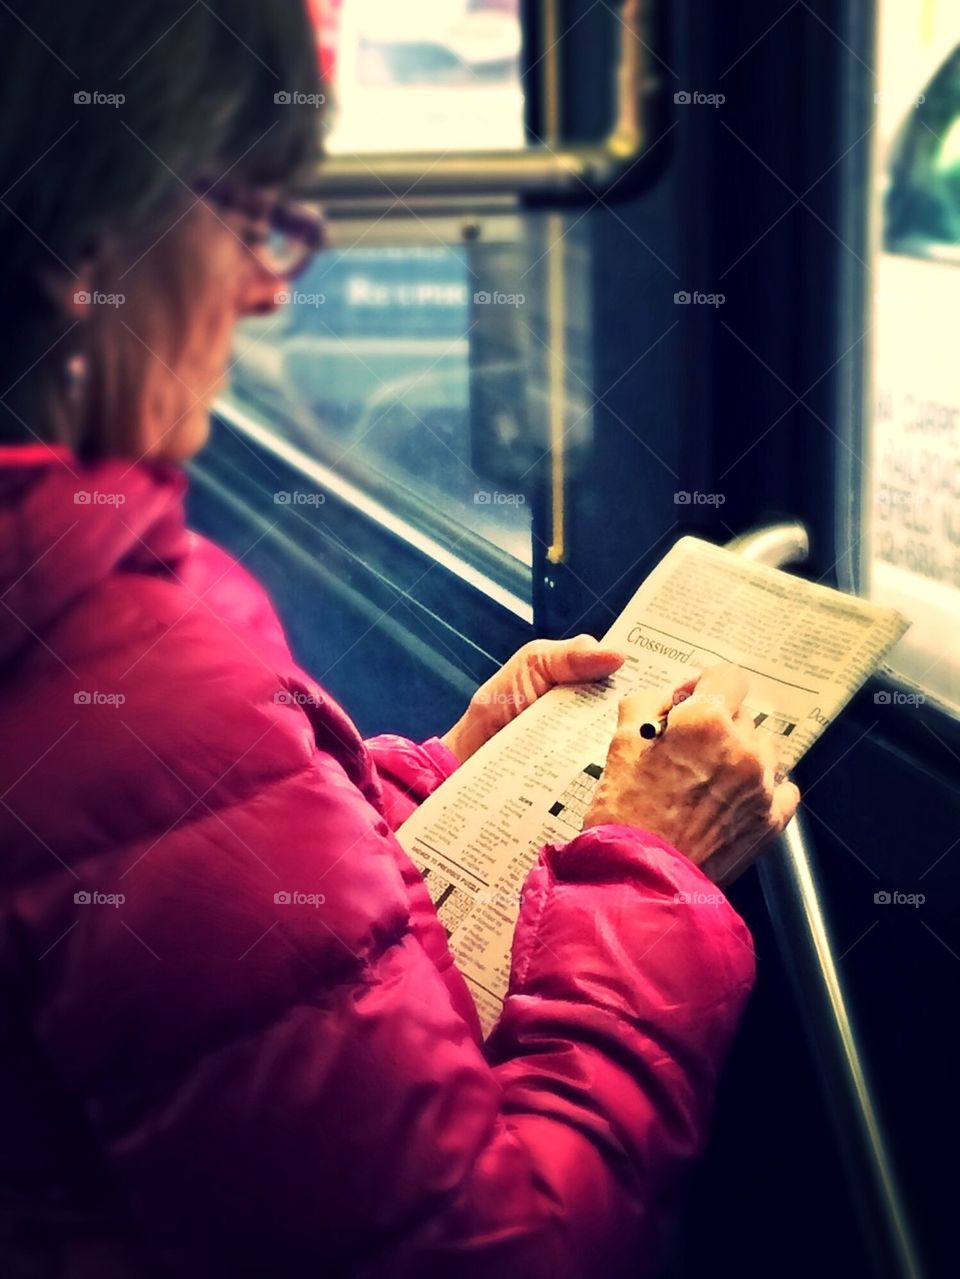 New York Times crossword puzzle on the bus